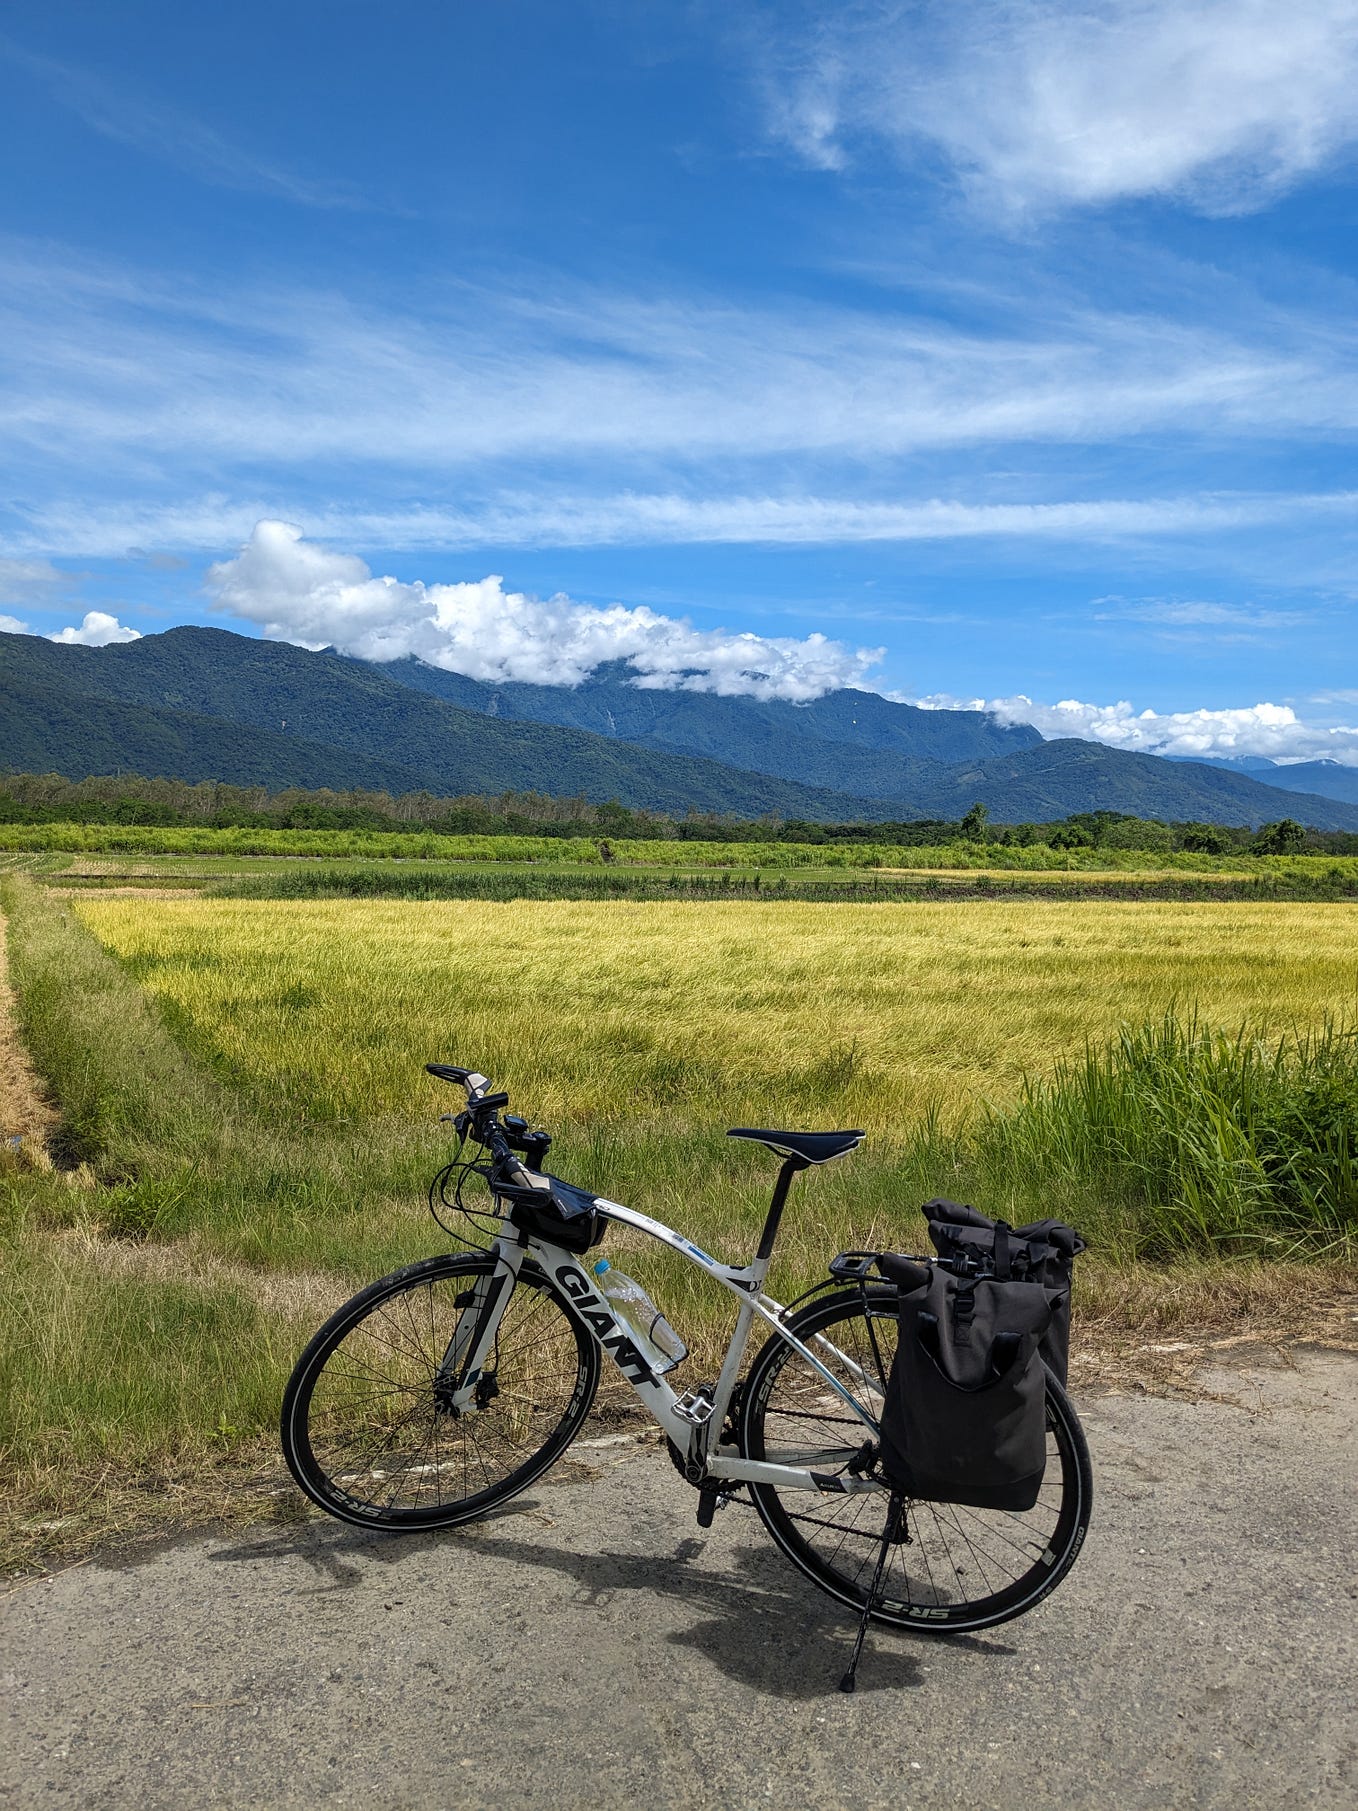 A Girl’s Guide to Solo-Cycling Taiwan’s East Coast (Hualien to Taitung)